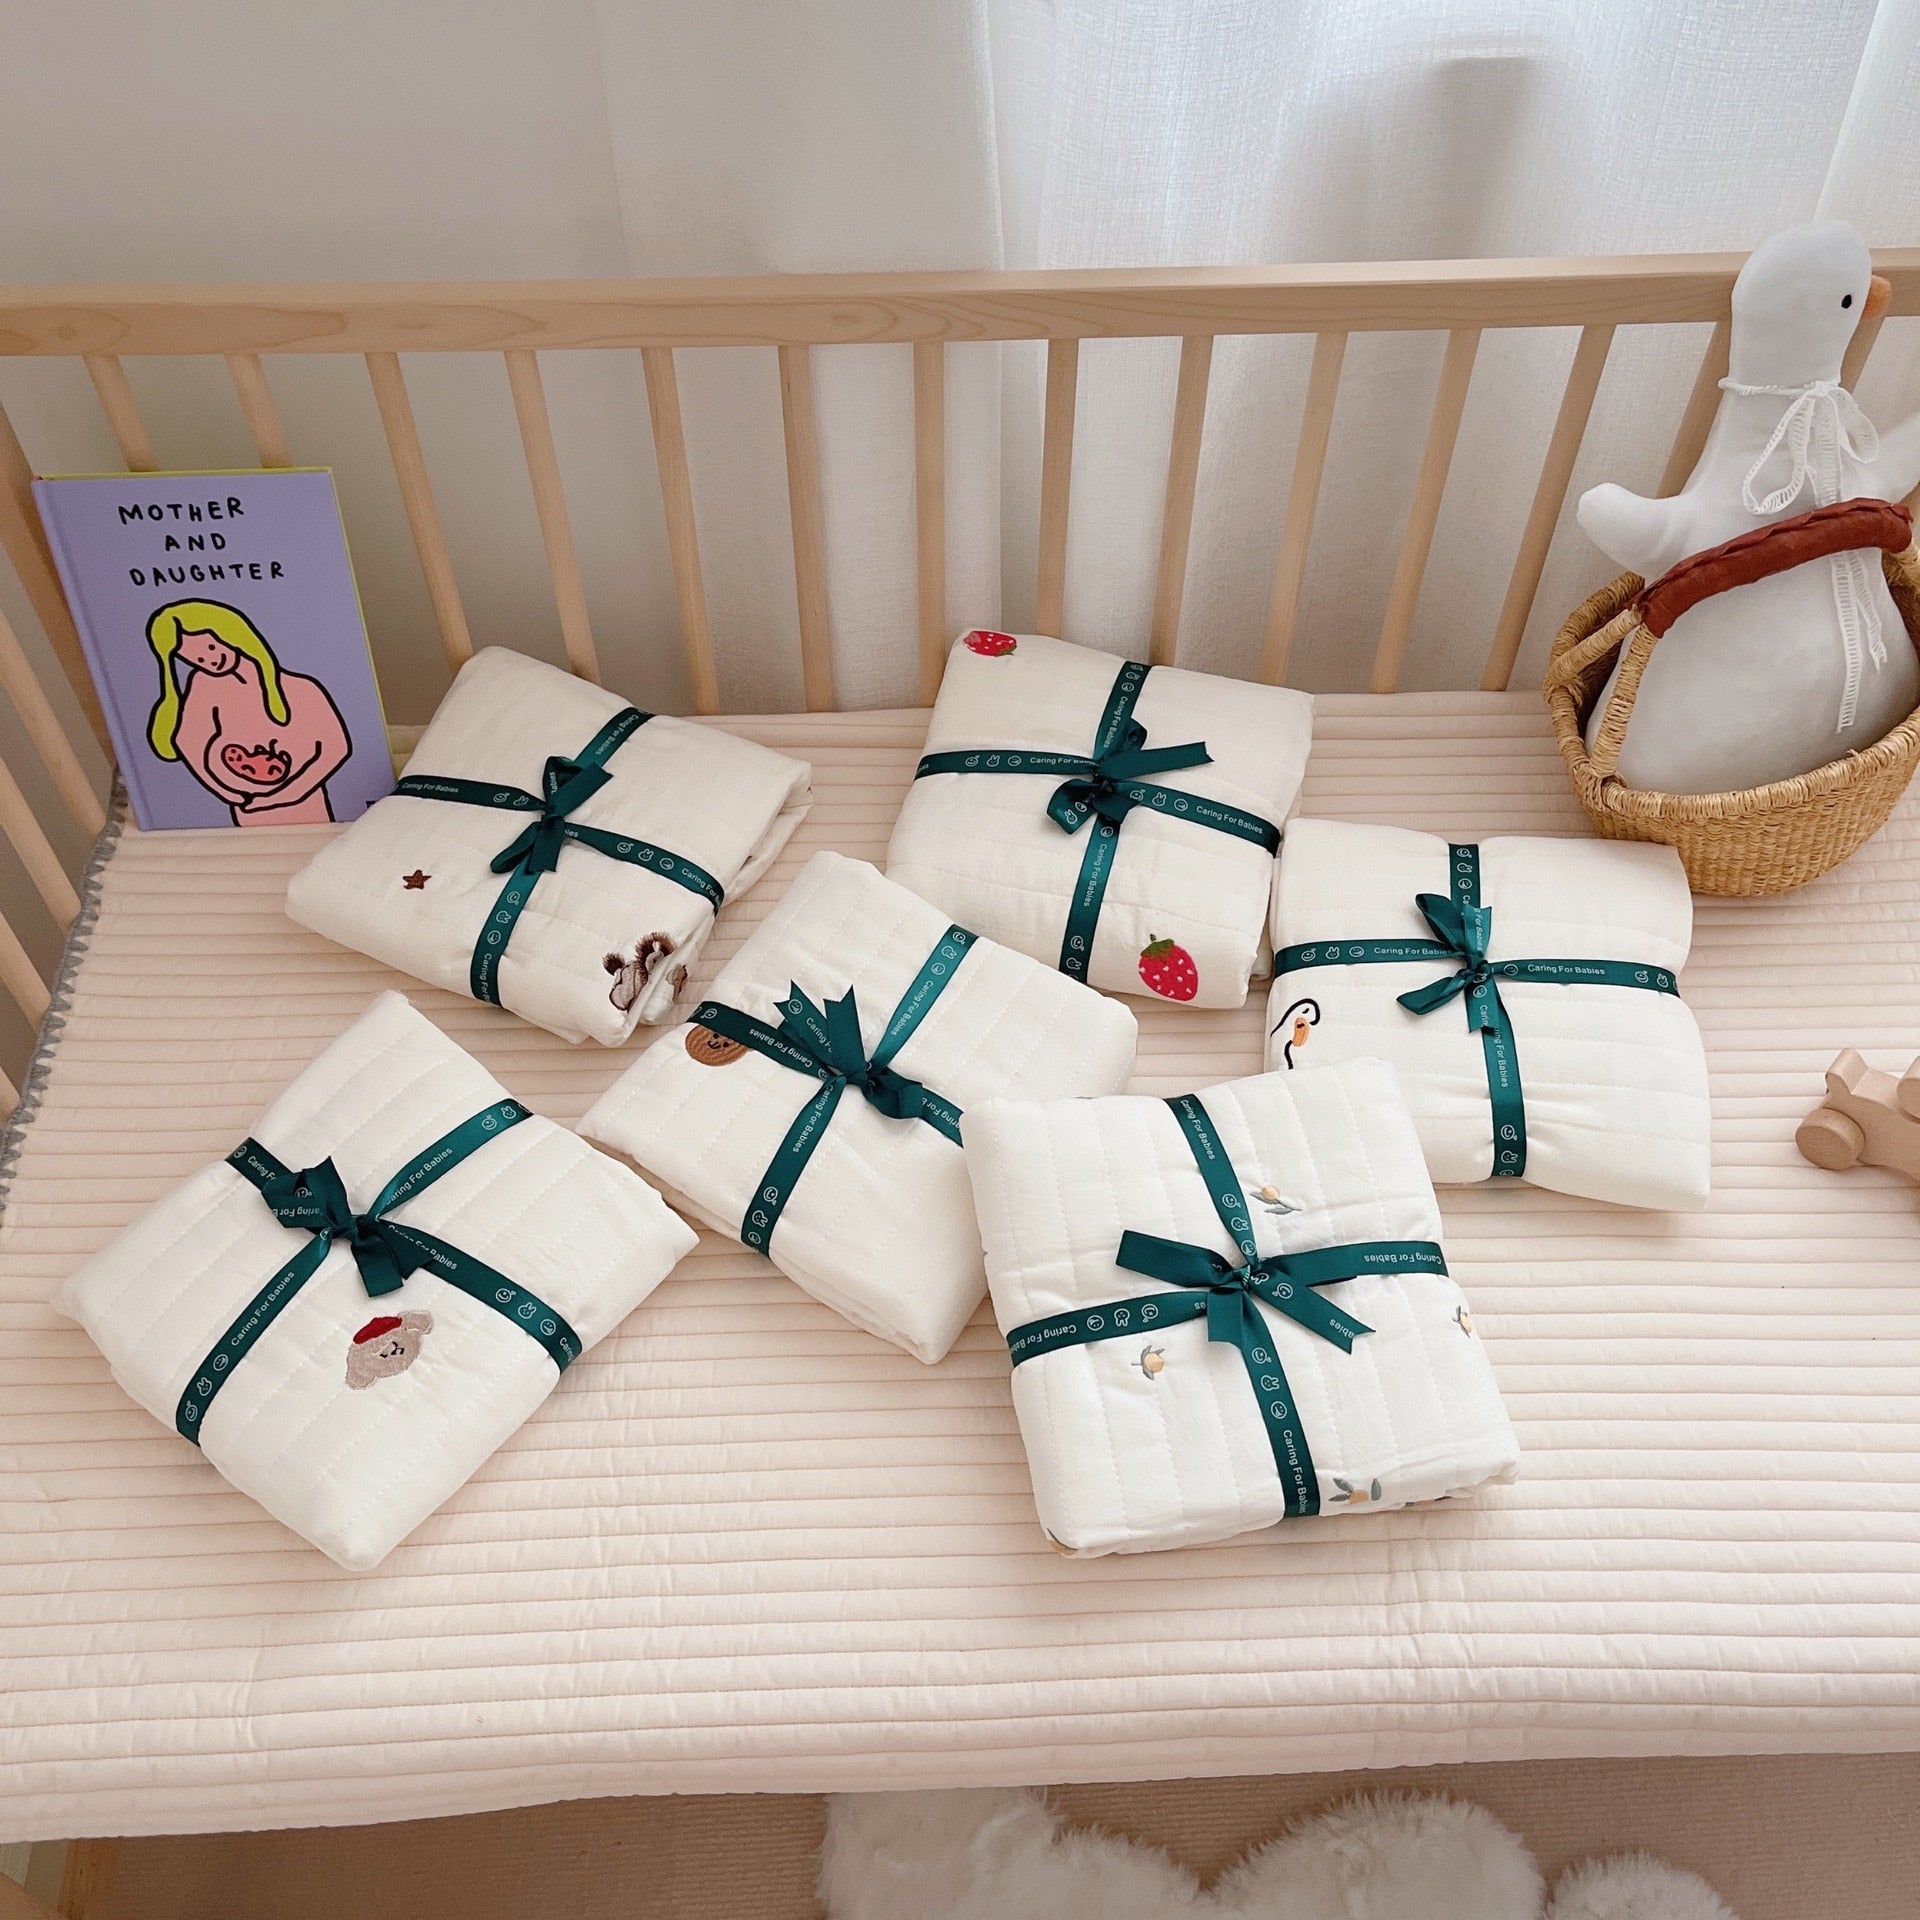 Quilted Cotton Baby Crib Sheet, Pillows and Rail Cover Sets